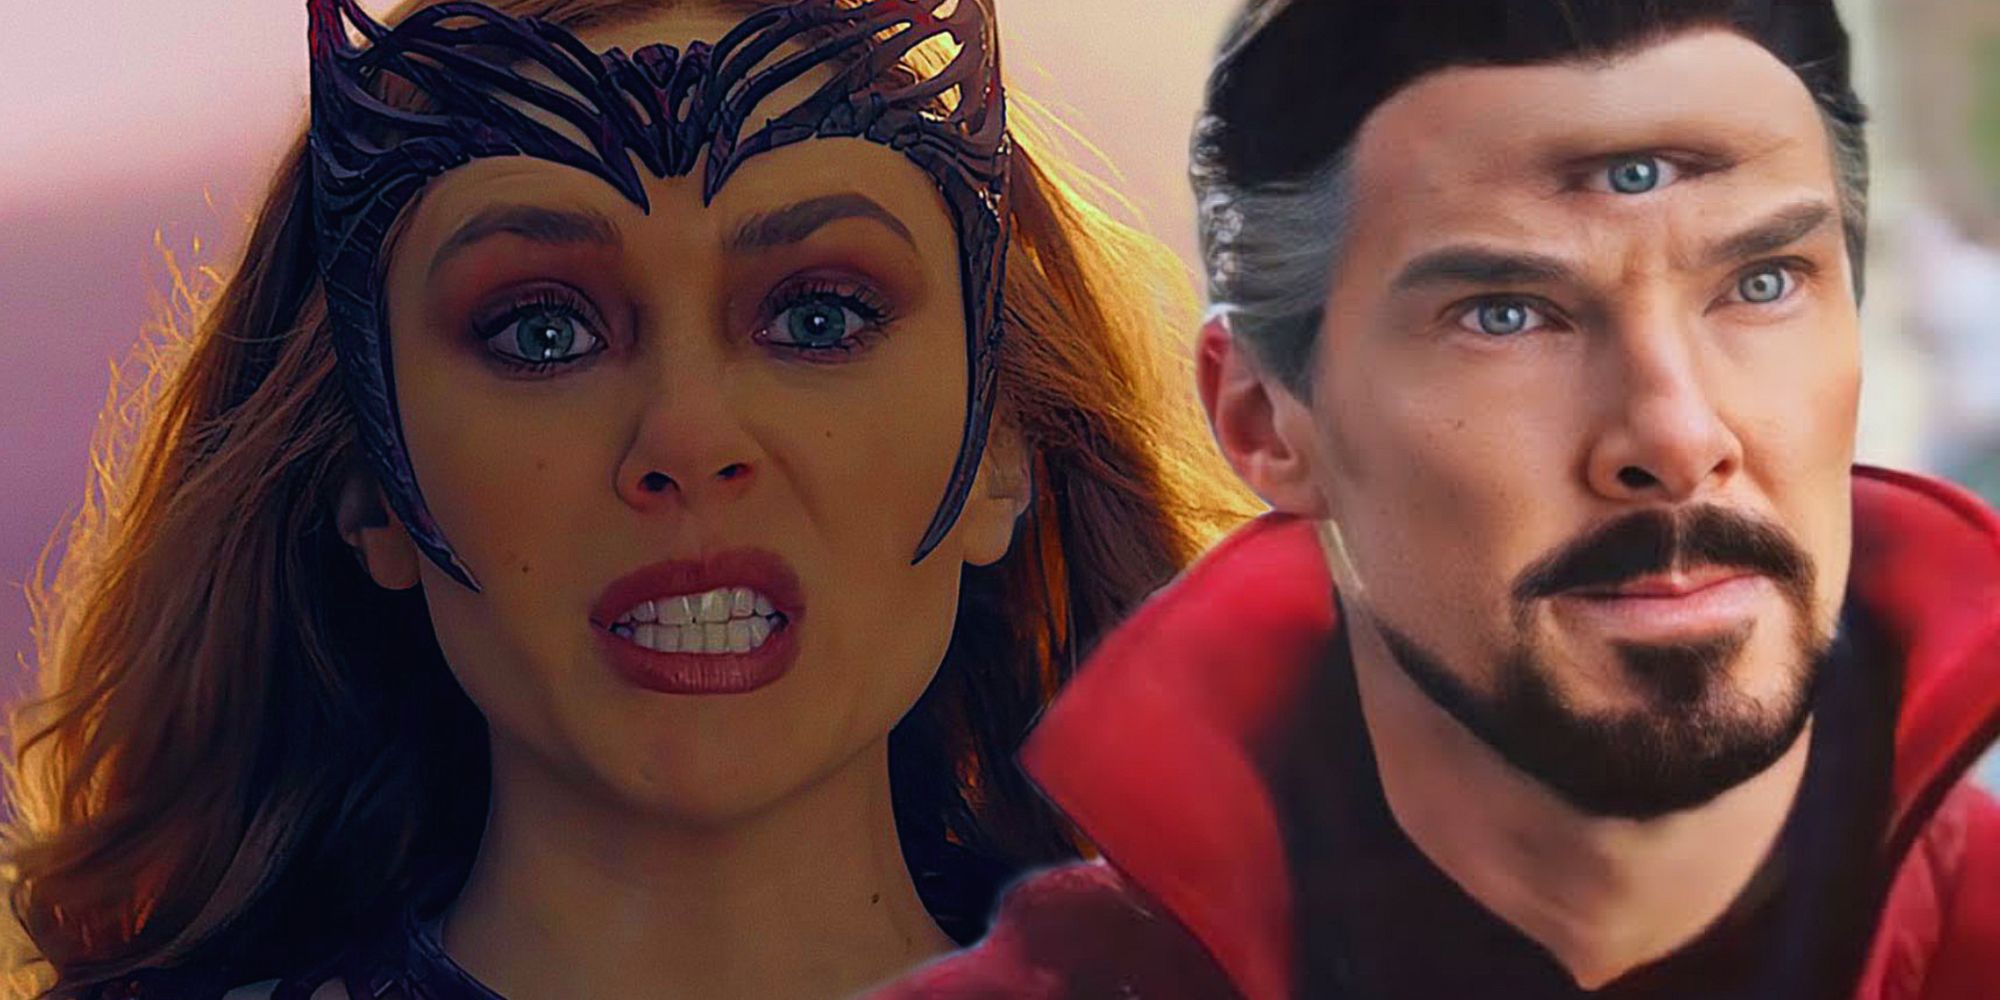 scarlet witch exposes strange feature img